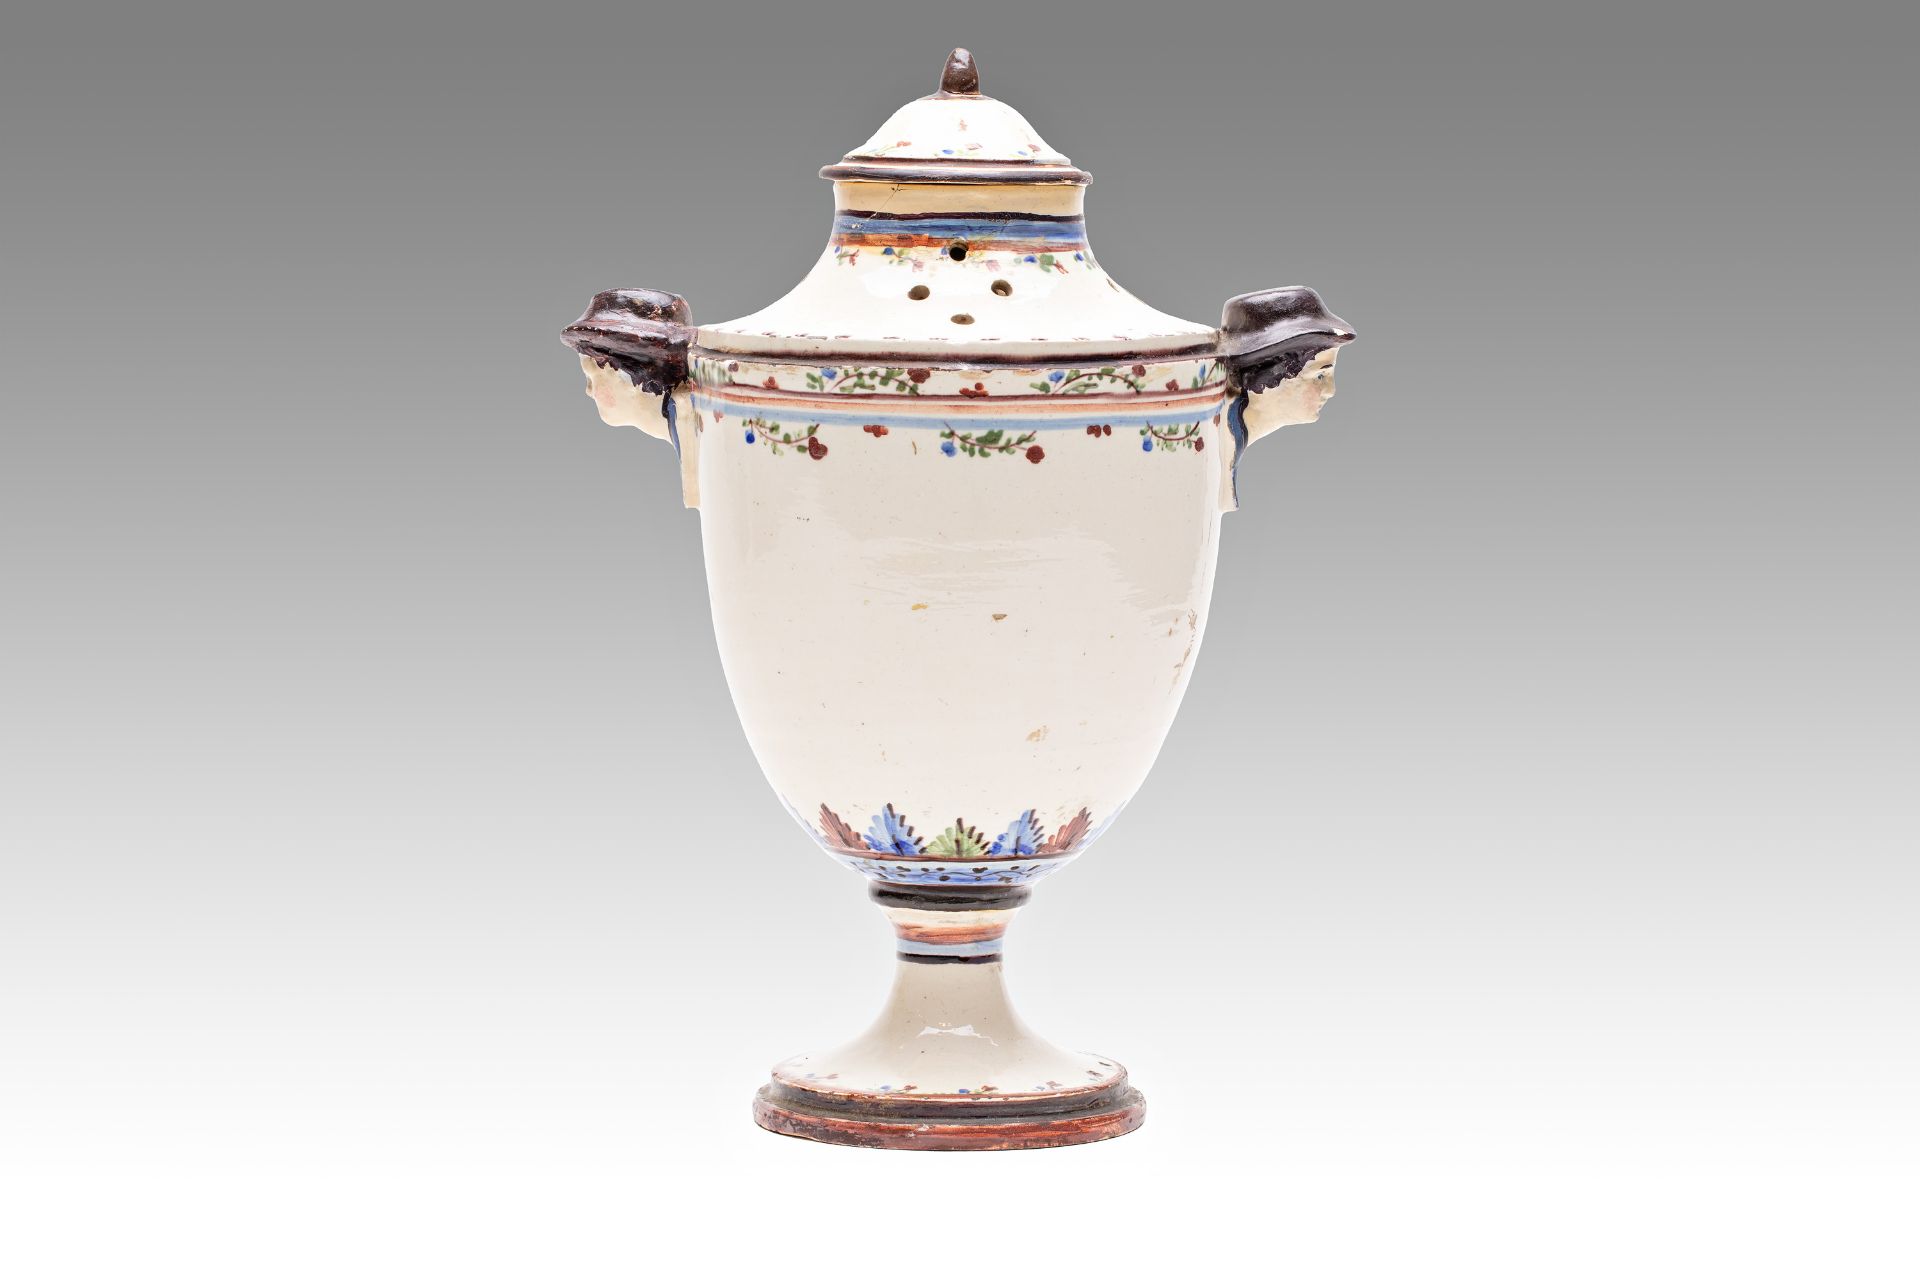 EMPIRE PHARMACY VASE | Central Europe (Central European / Central Europe - around 1820) - Image 2 of 3